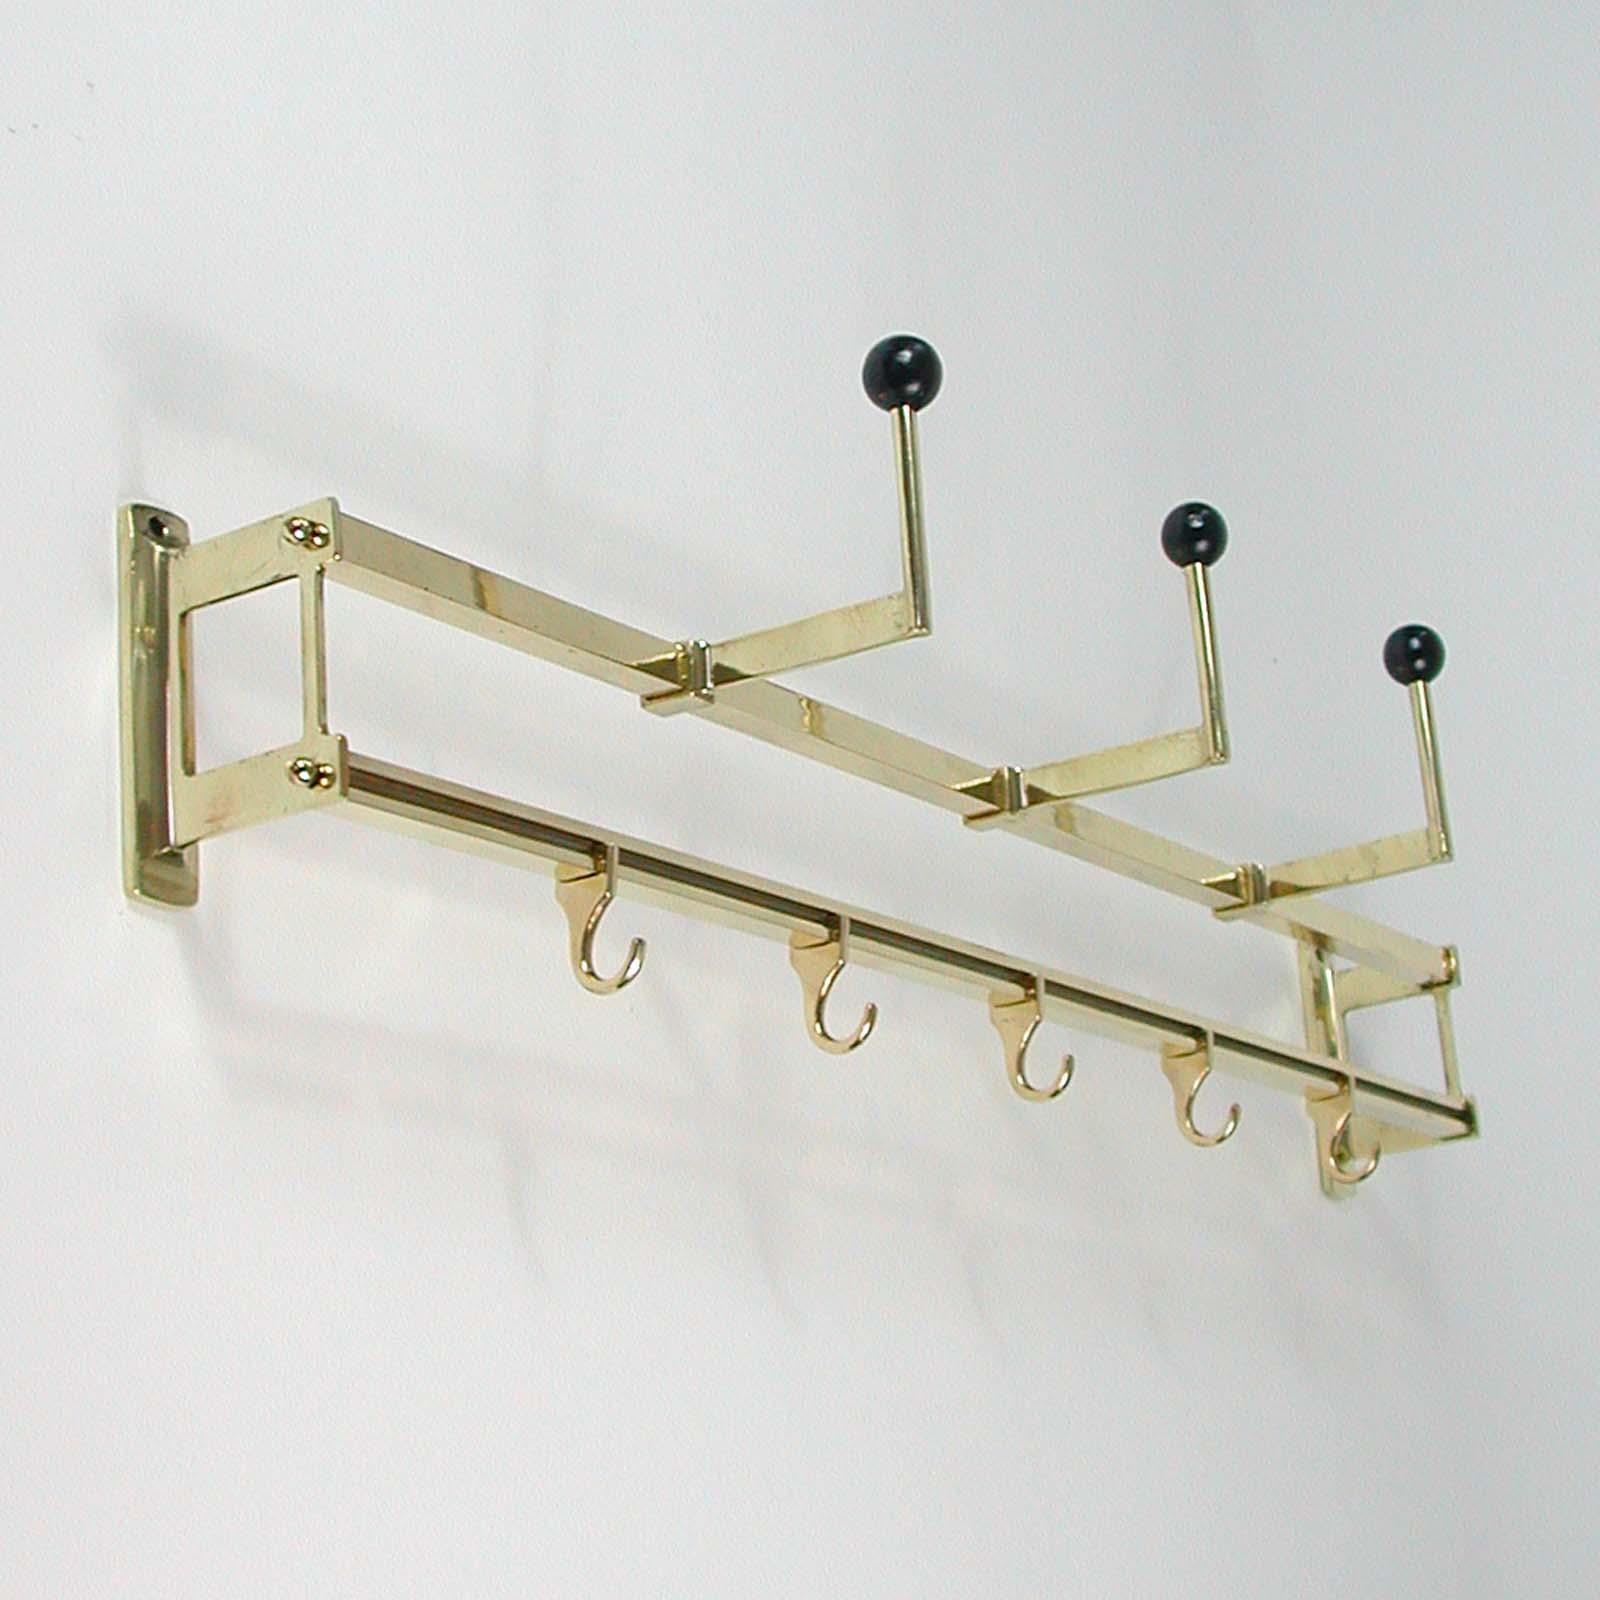 1930s Art Deco Bauhaus Brass and Wood Coat and Hat Rack 6